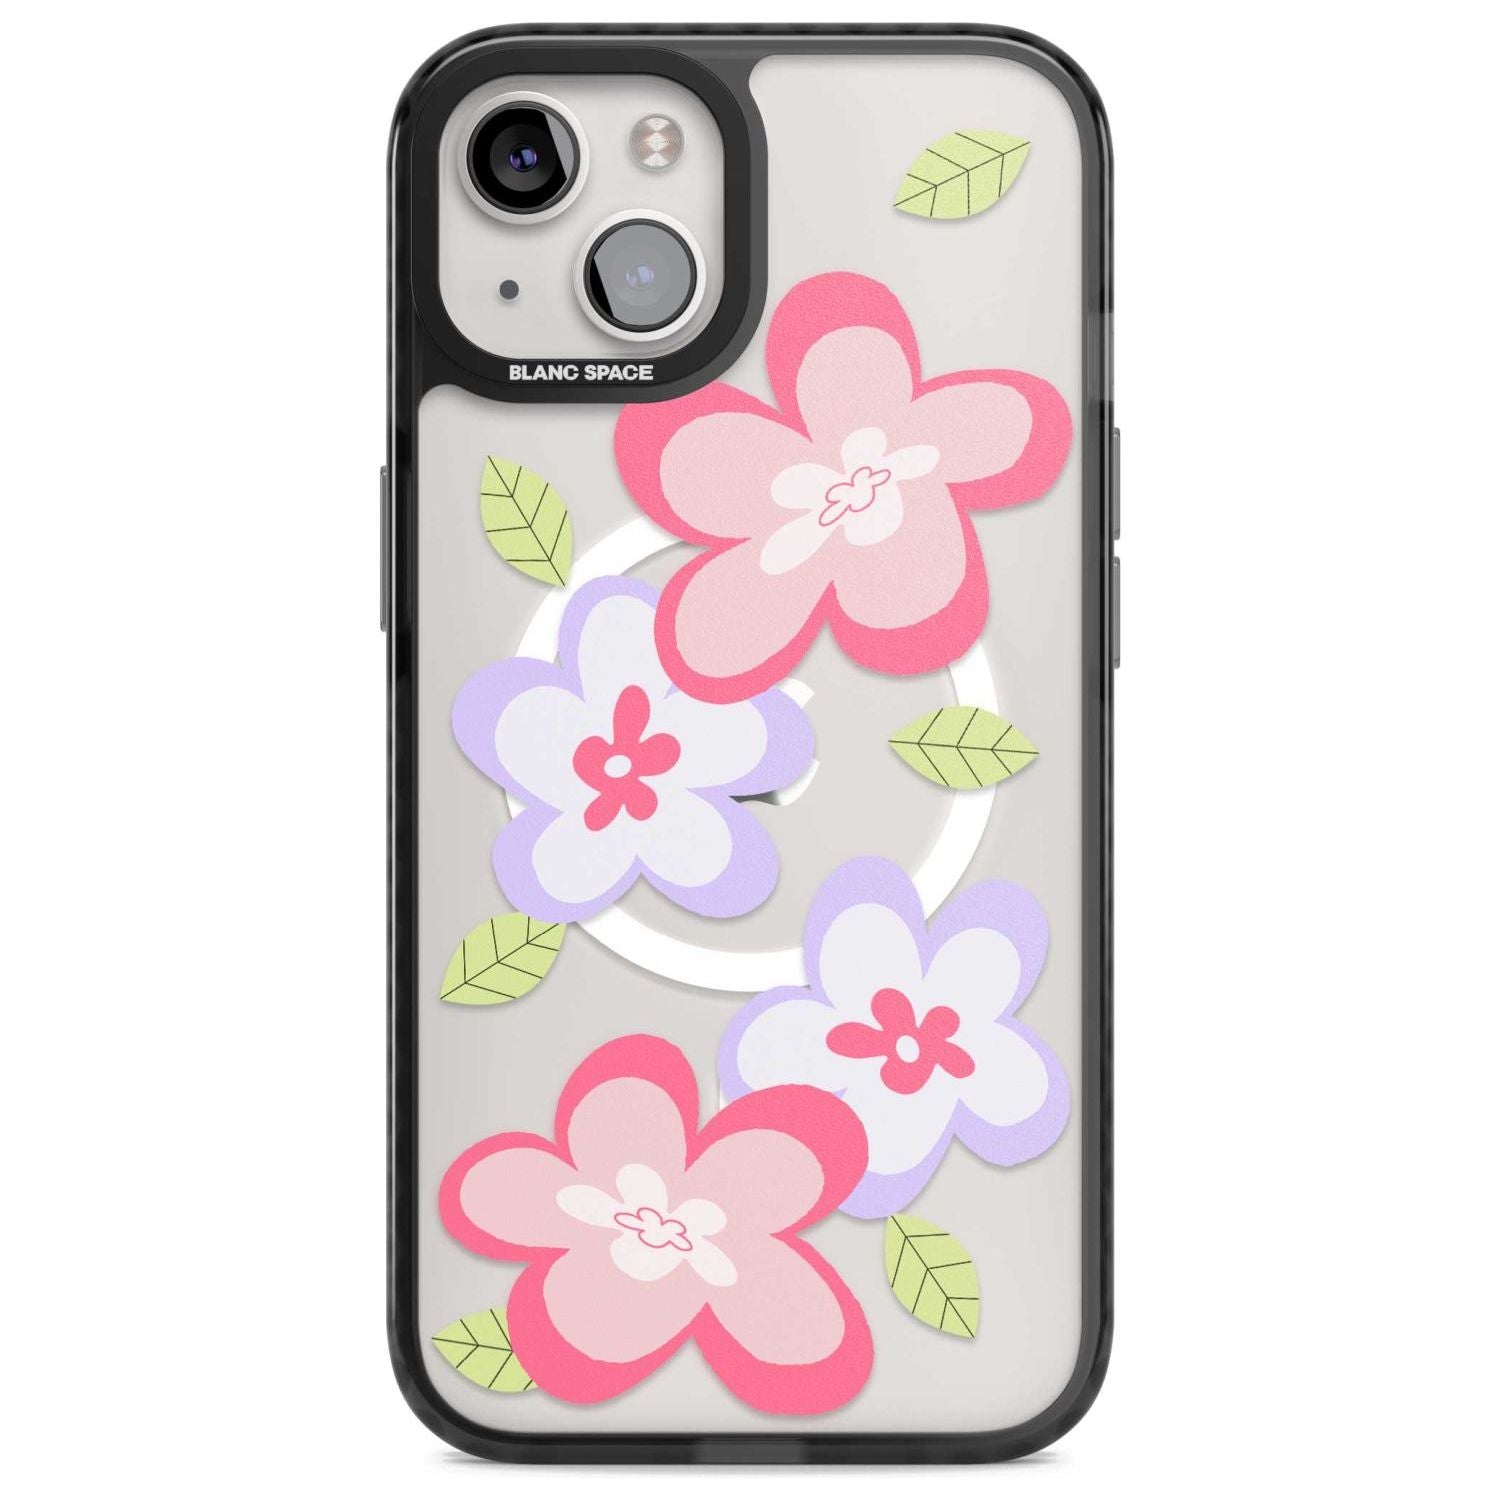 Funky Flowers Phone Case iPhone 15 Plus / Magsafe Black Impact Case,iPhone 15 / Magsafe Black Impact Case,iPhone 14 Plus / Magsafe Black Impact Case,iPhone 14 / Magsafe Black Impact Case,iPhone 13 / Magsafe Black Impact Case Blanc Space